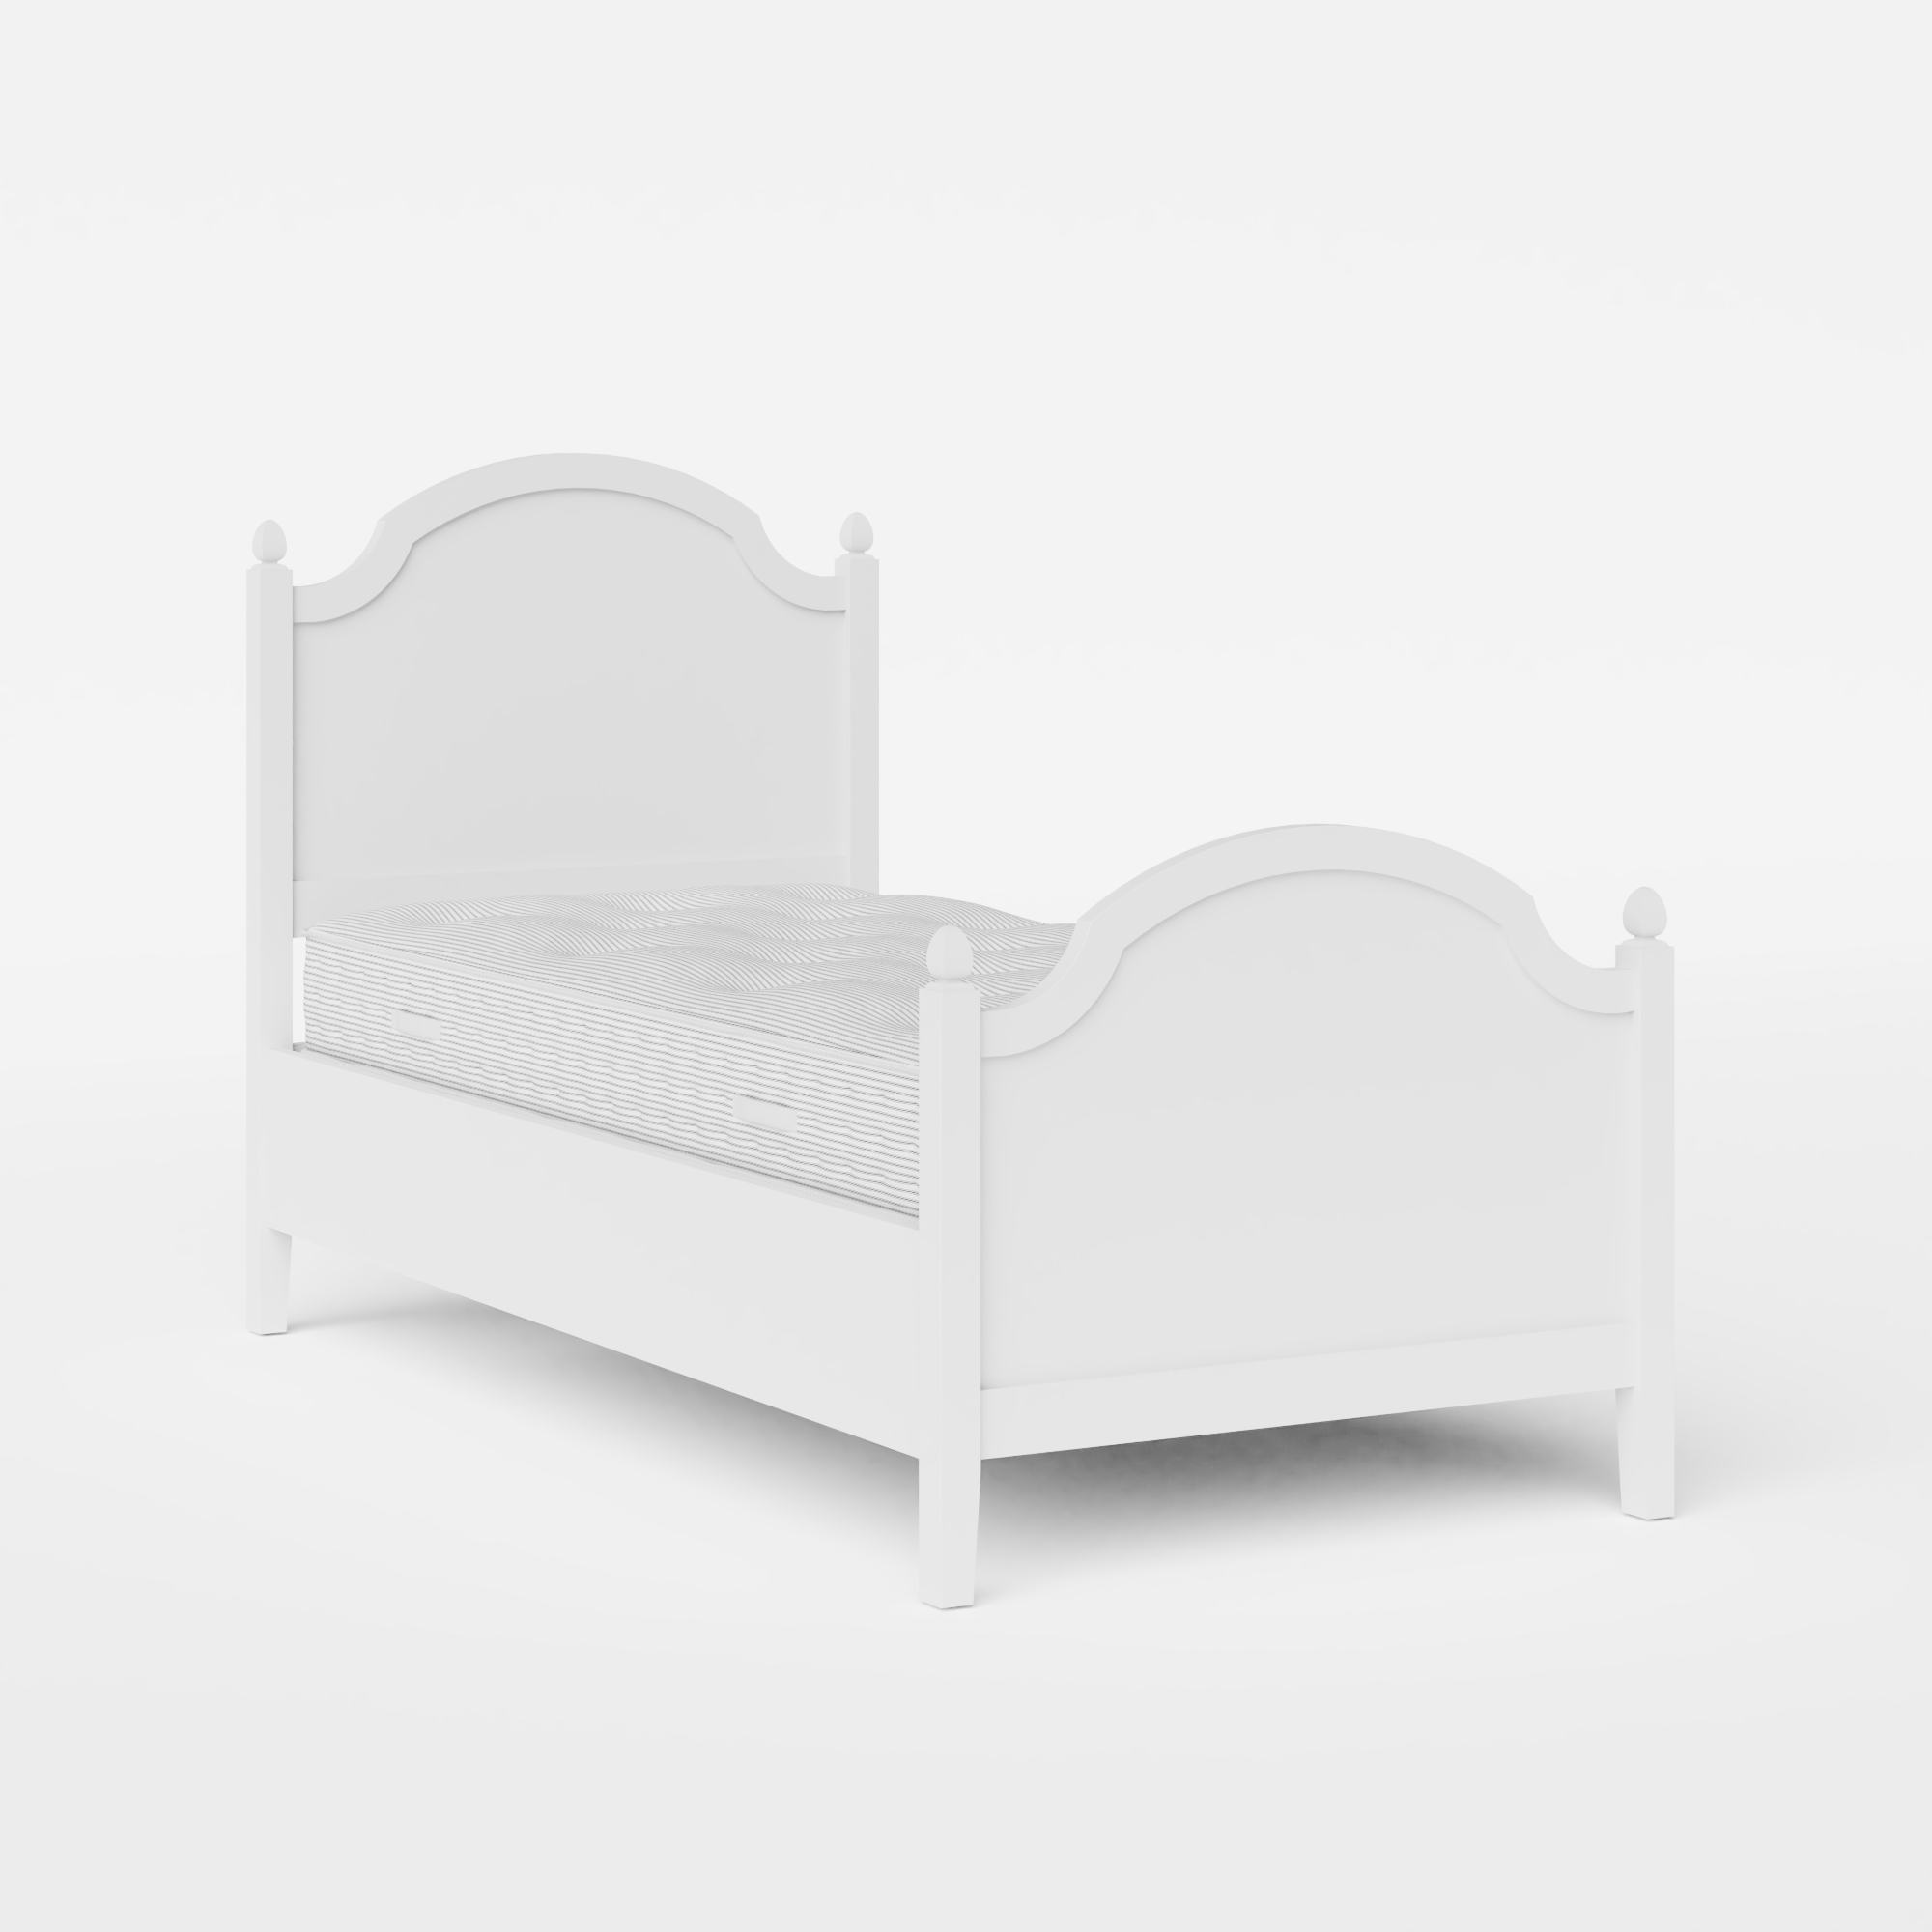 Kipling Painted single painted wood bed in white with Juno mattress